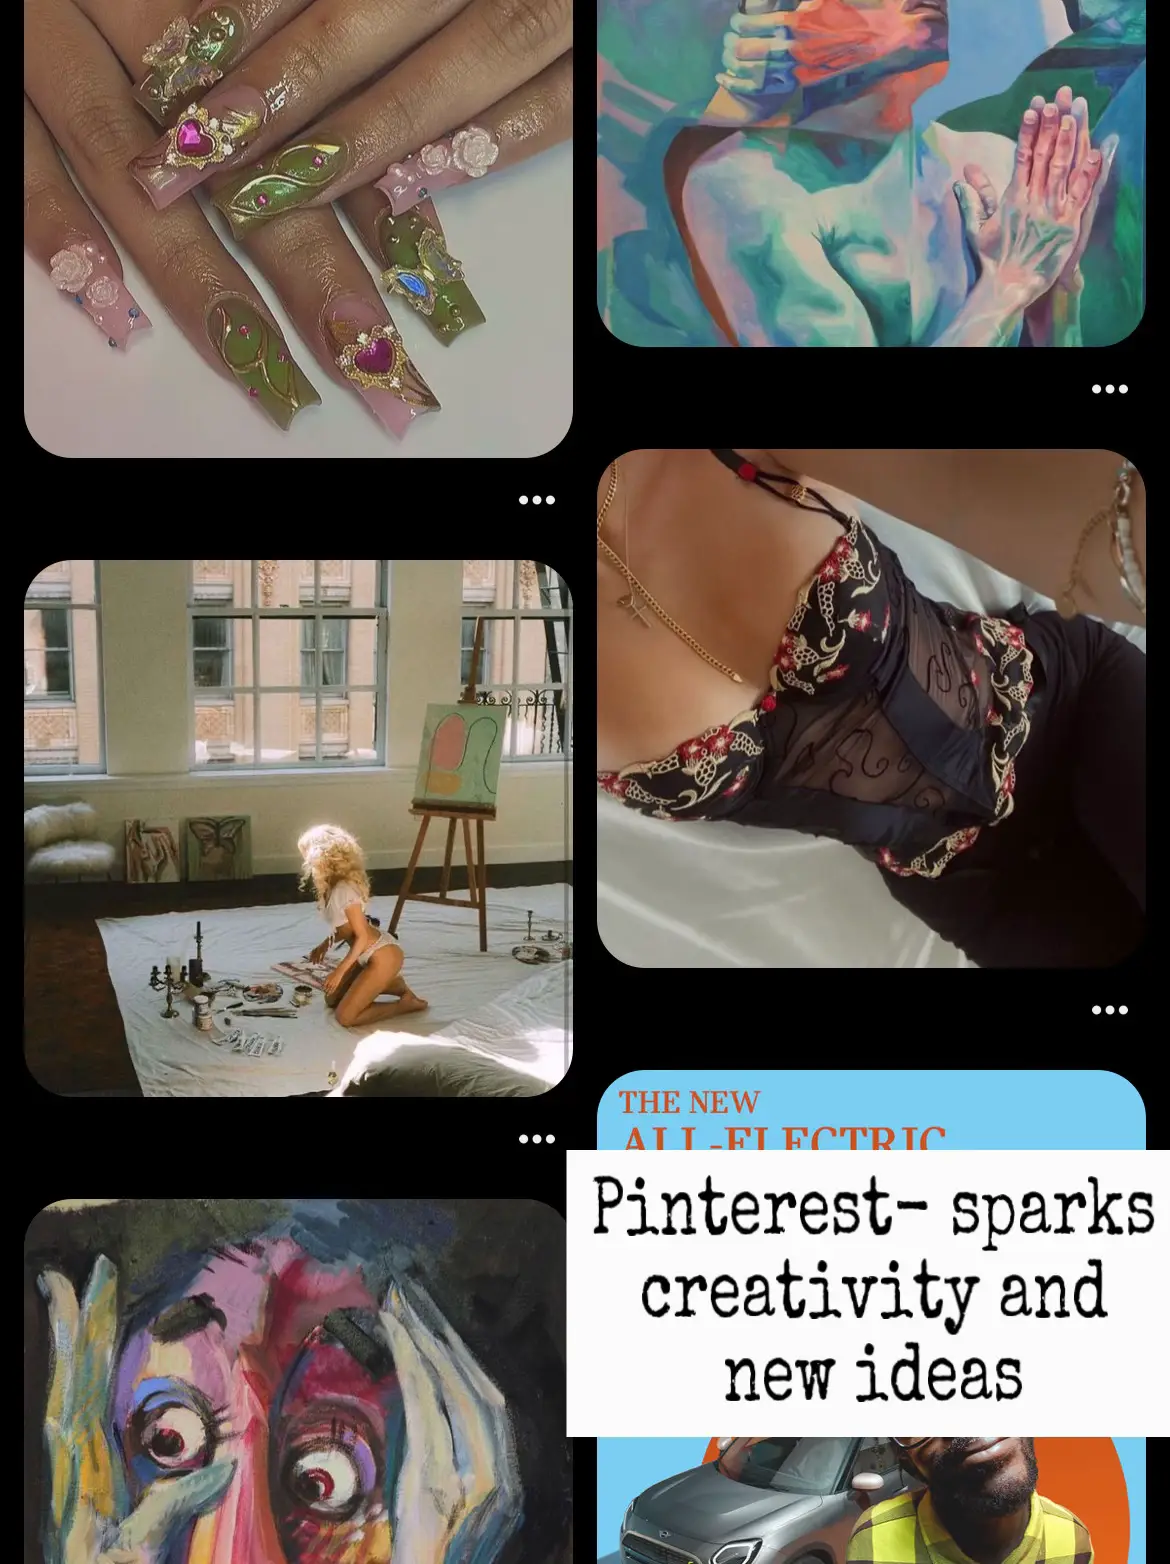  A collage of images and text that says "Pinterest-sparks creativity and new ideas".